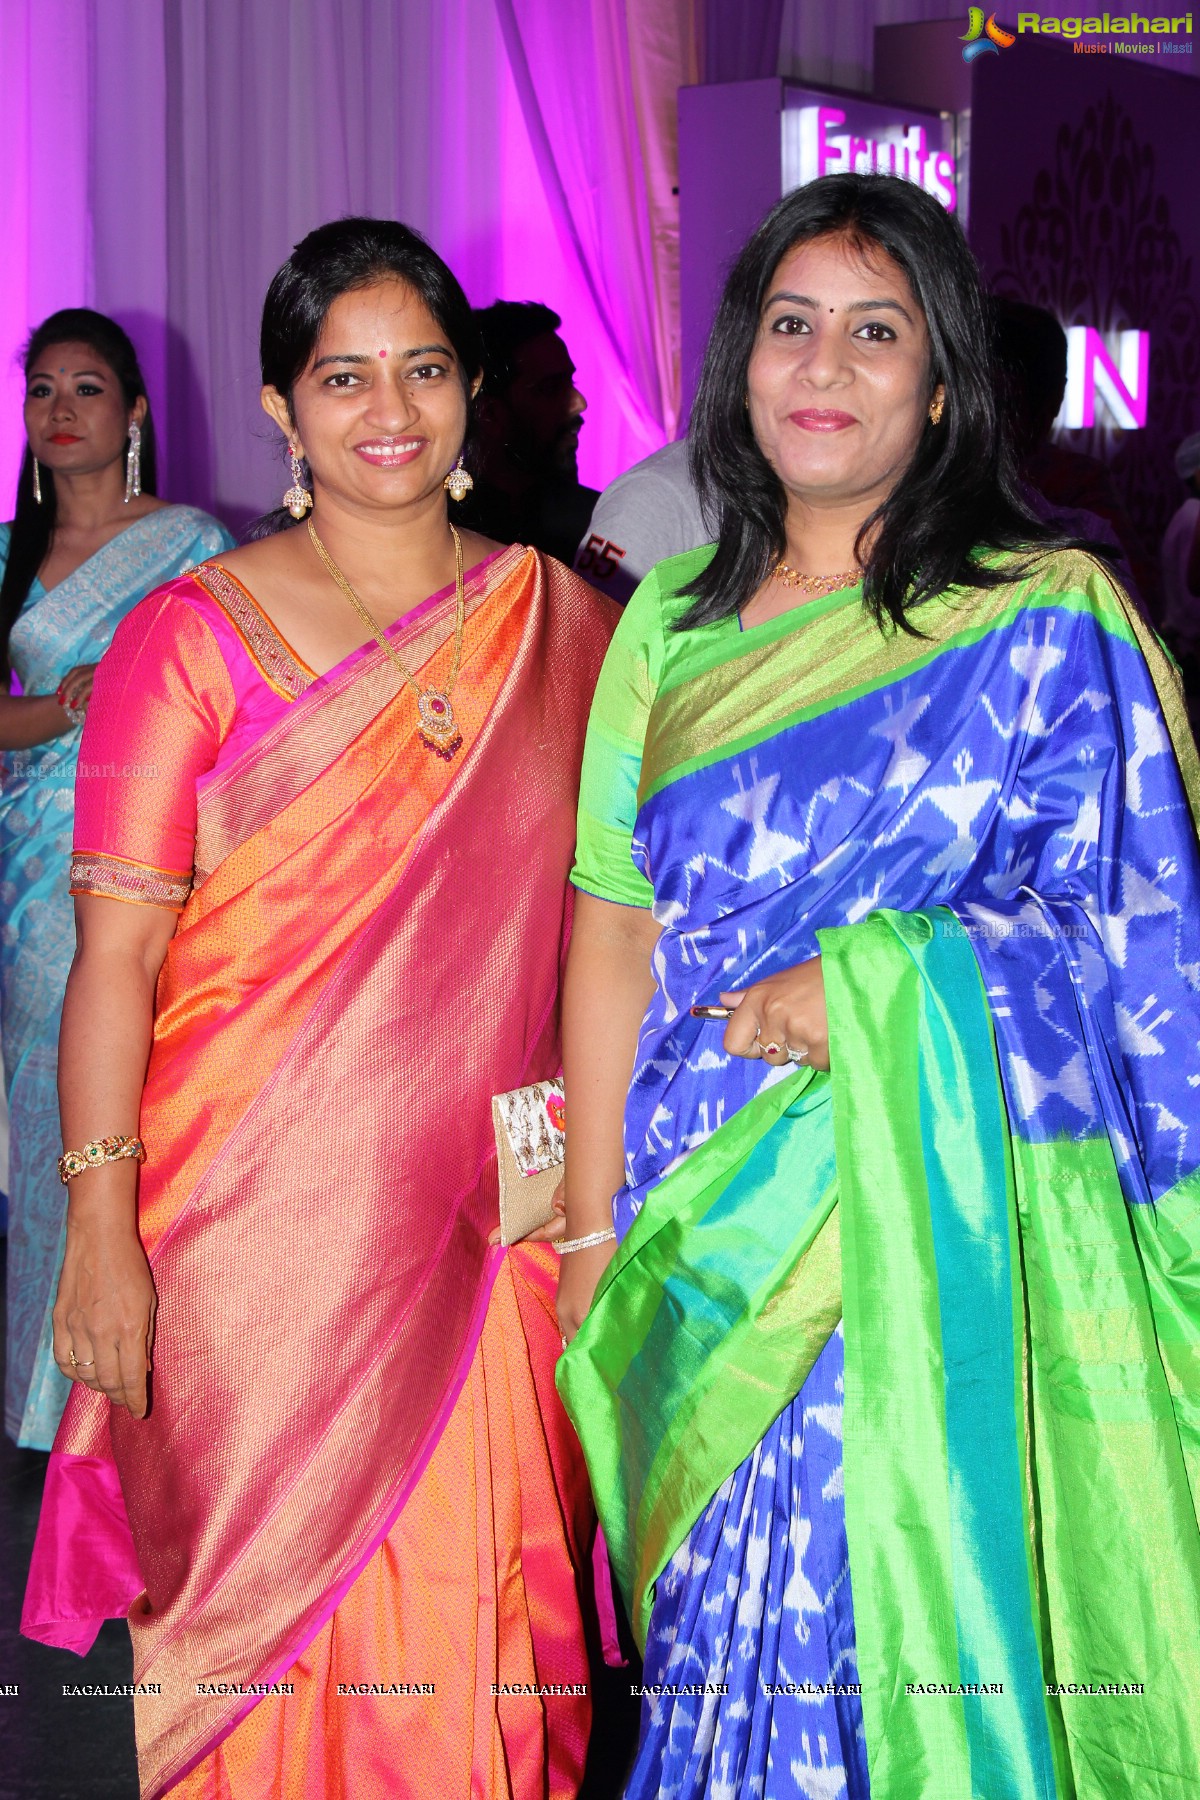 Saree Ceremony of Sridha Reddy and Dhothi Ceremony of Aadhitya Reddy at N Convention